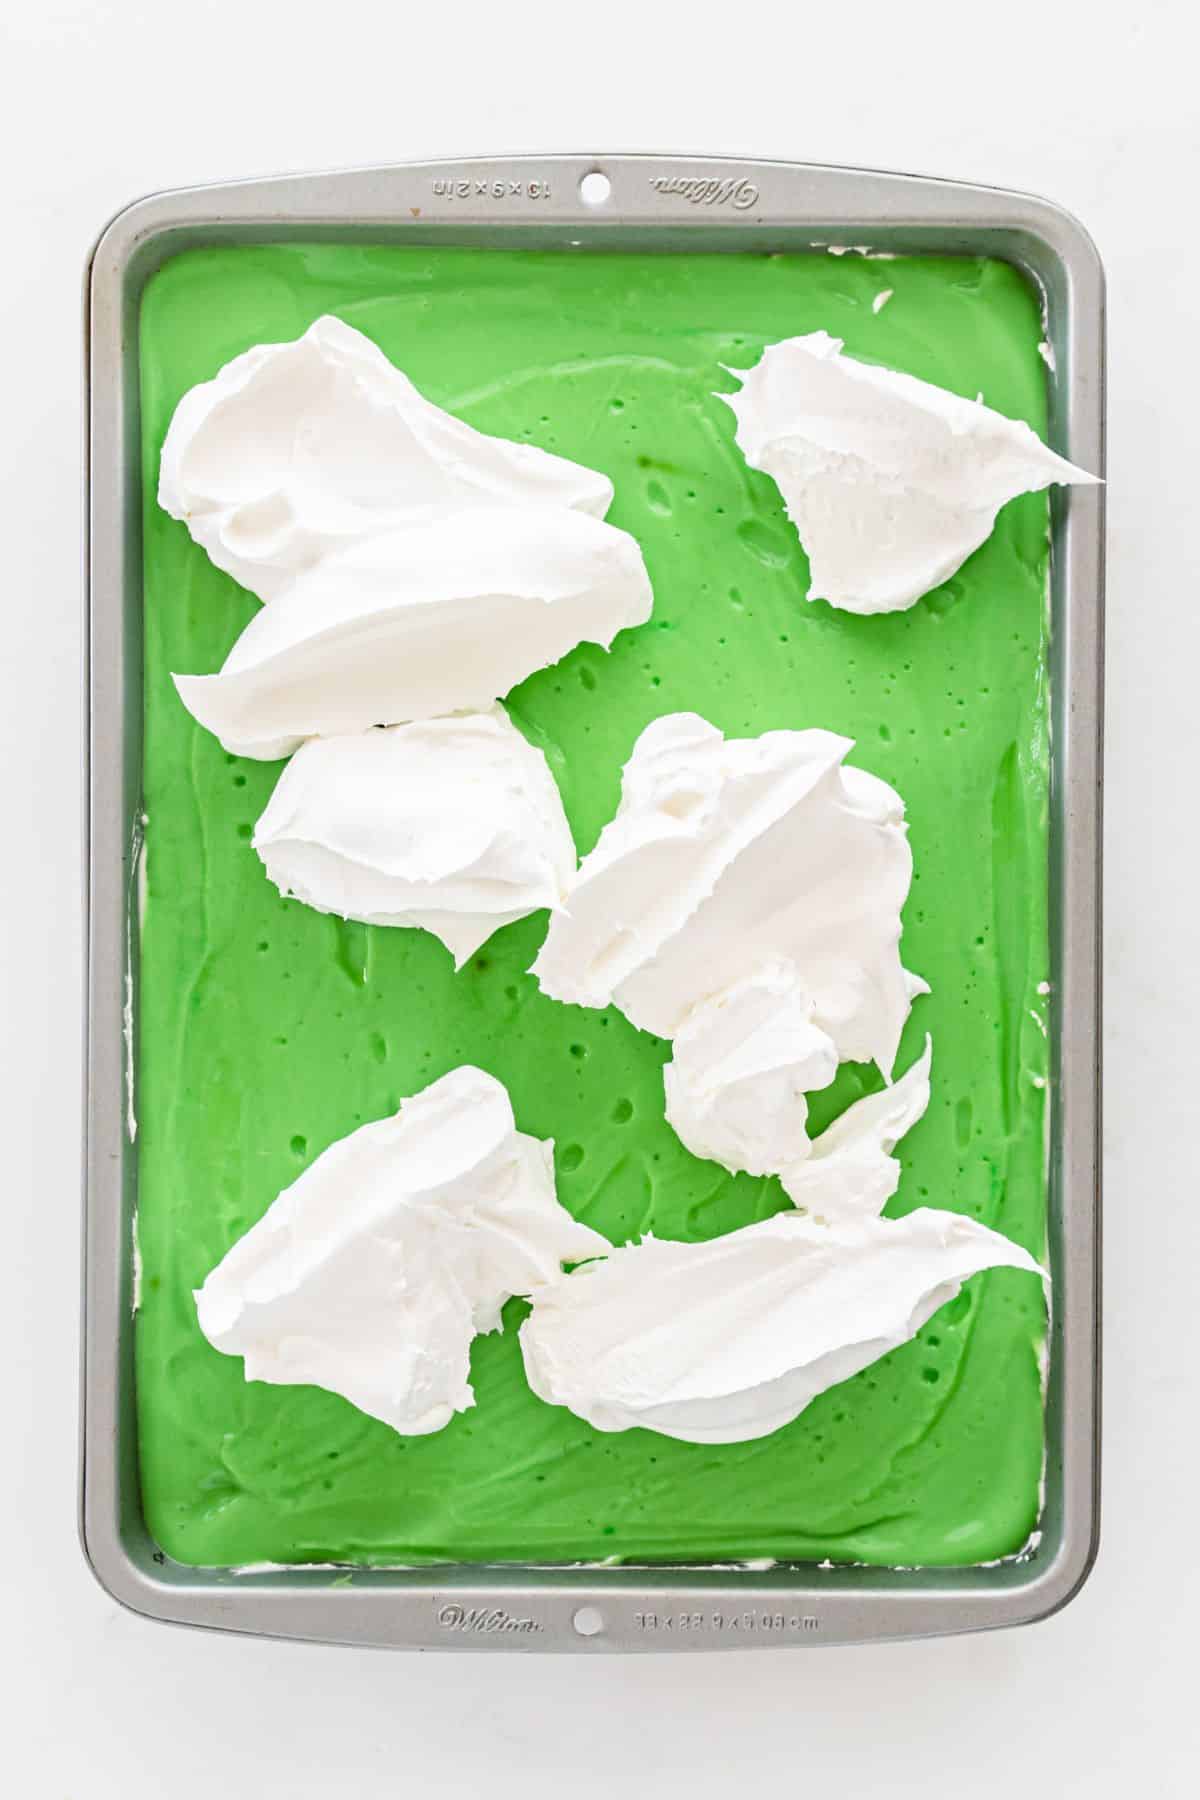 whipped cream on top of green pudding